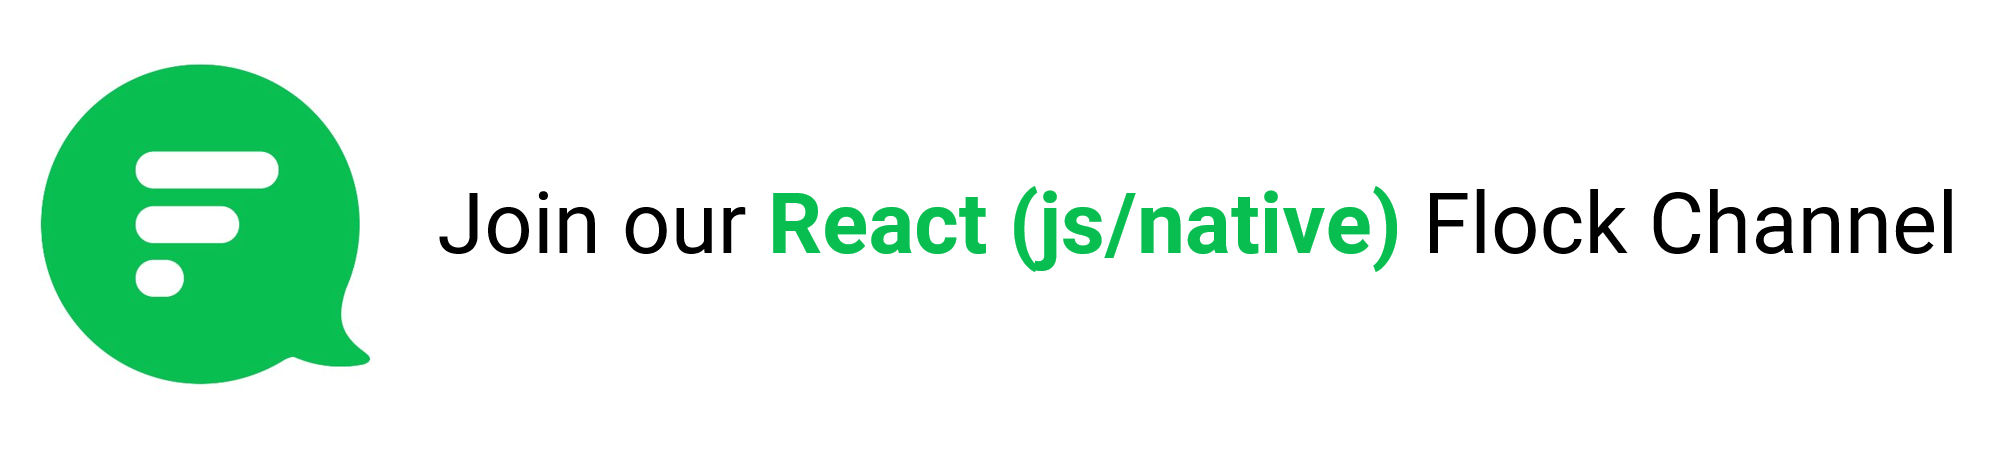 Join our React Js/Native Flock Channel